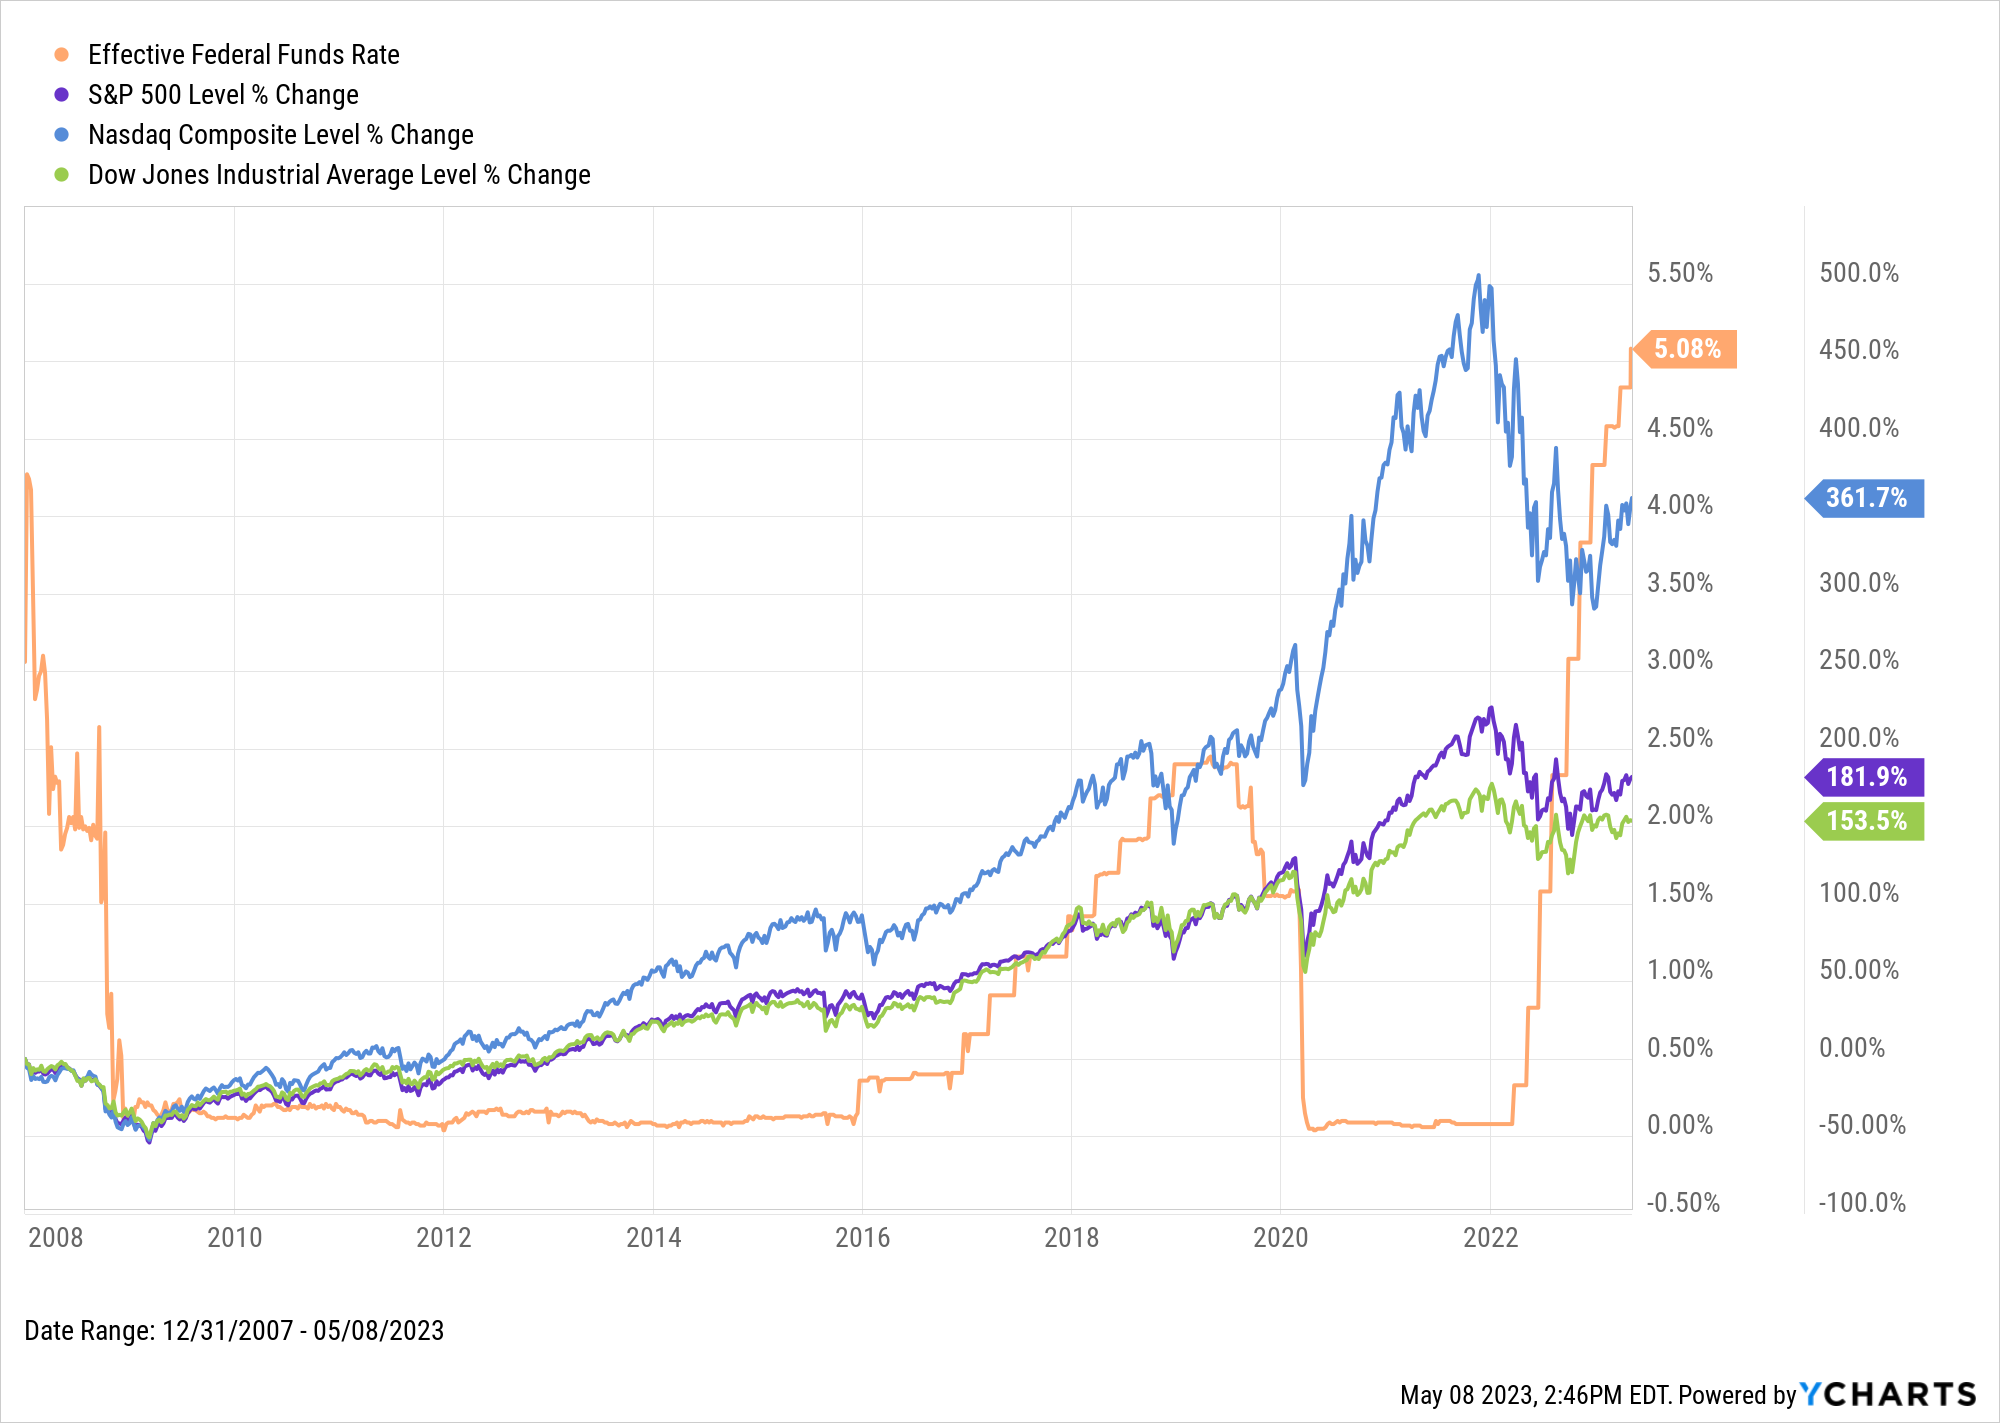 Historical chart of Fed Funds Rate vs. US Stock Market Indexes